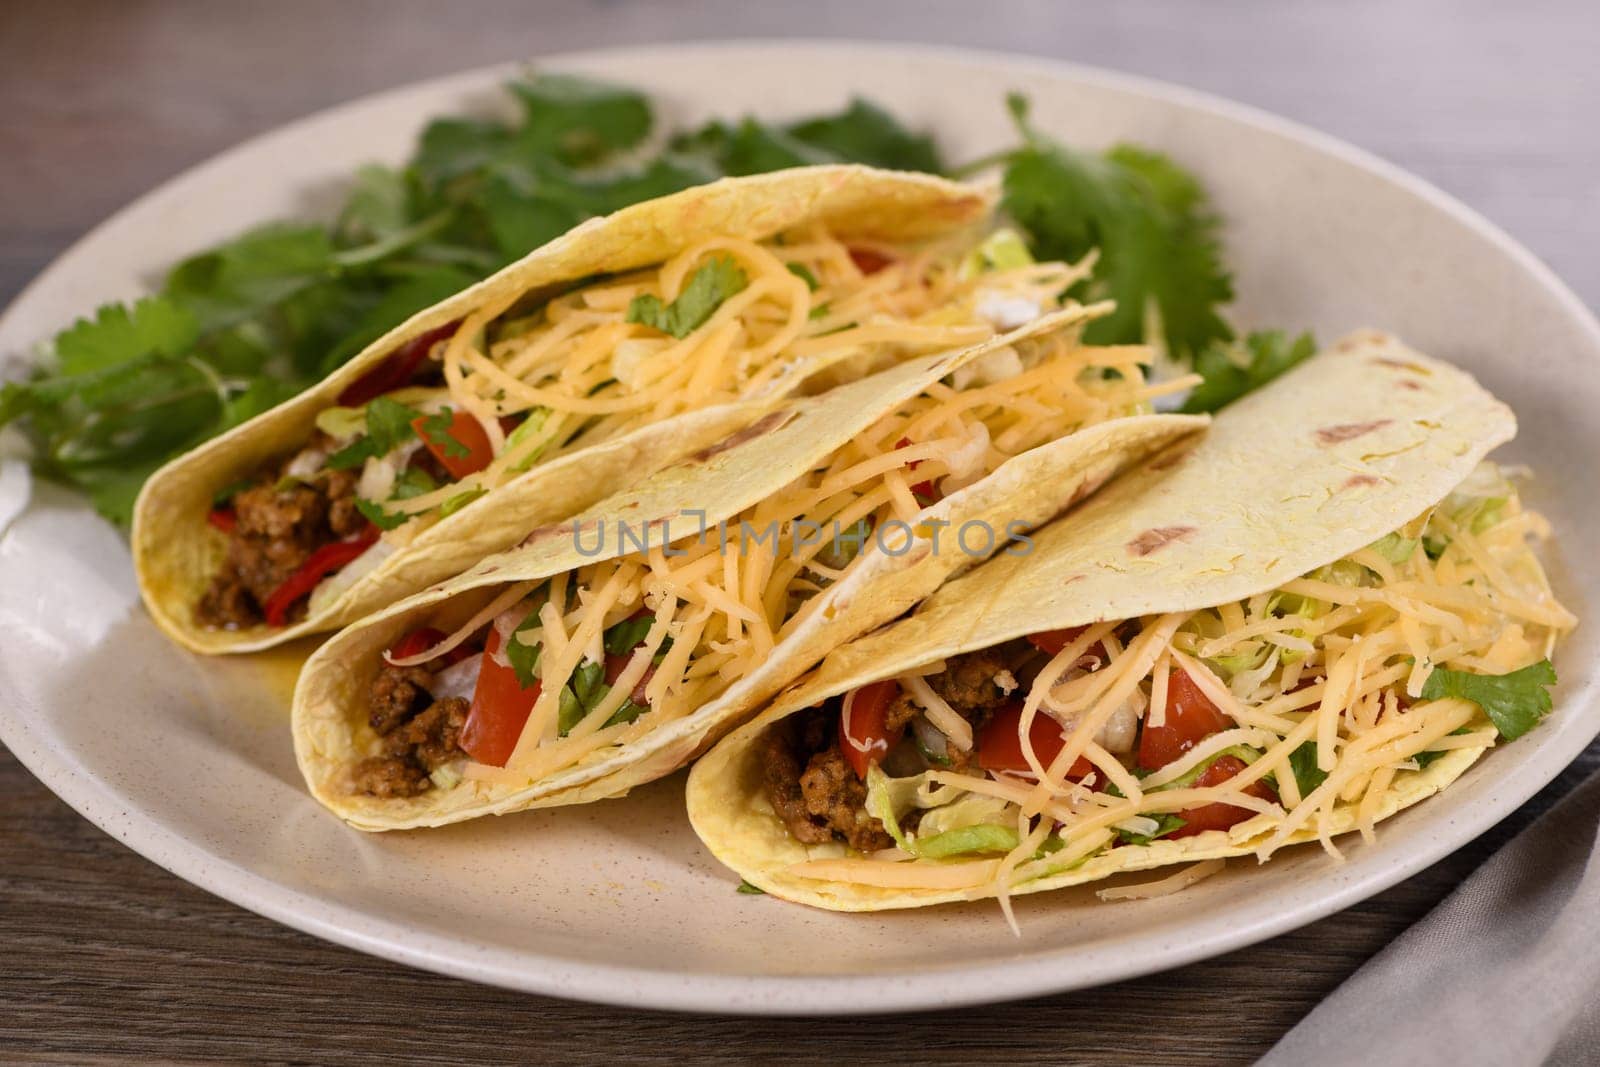 Taco with ground beef, cabbage and cheese by Apolonia